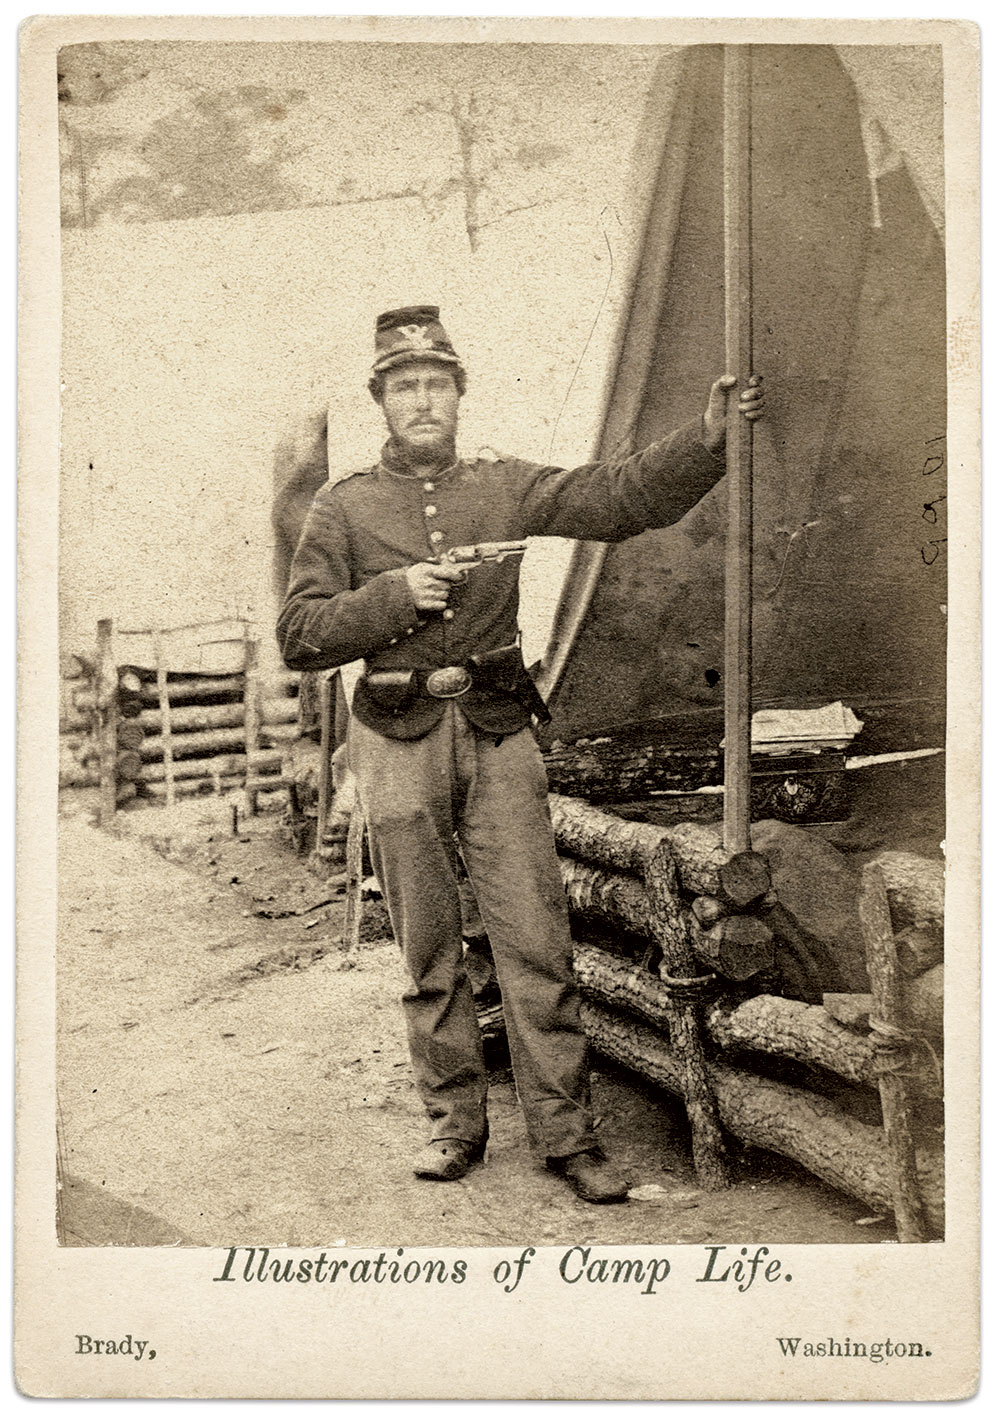 Figure 9: New York soldier with pistol at tent, 1861-62. Albumen silver print from glass negative. Rick Brown Collection of American Photography.